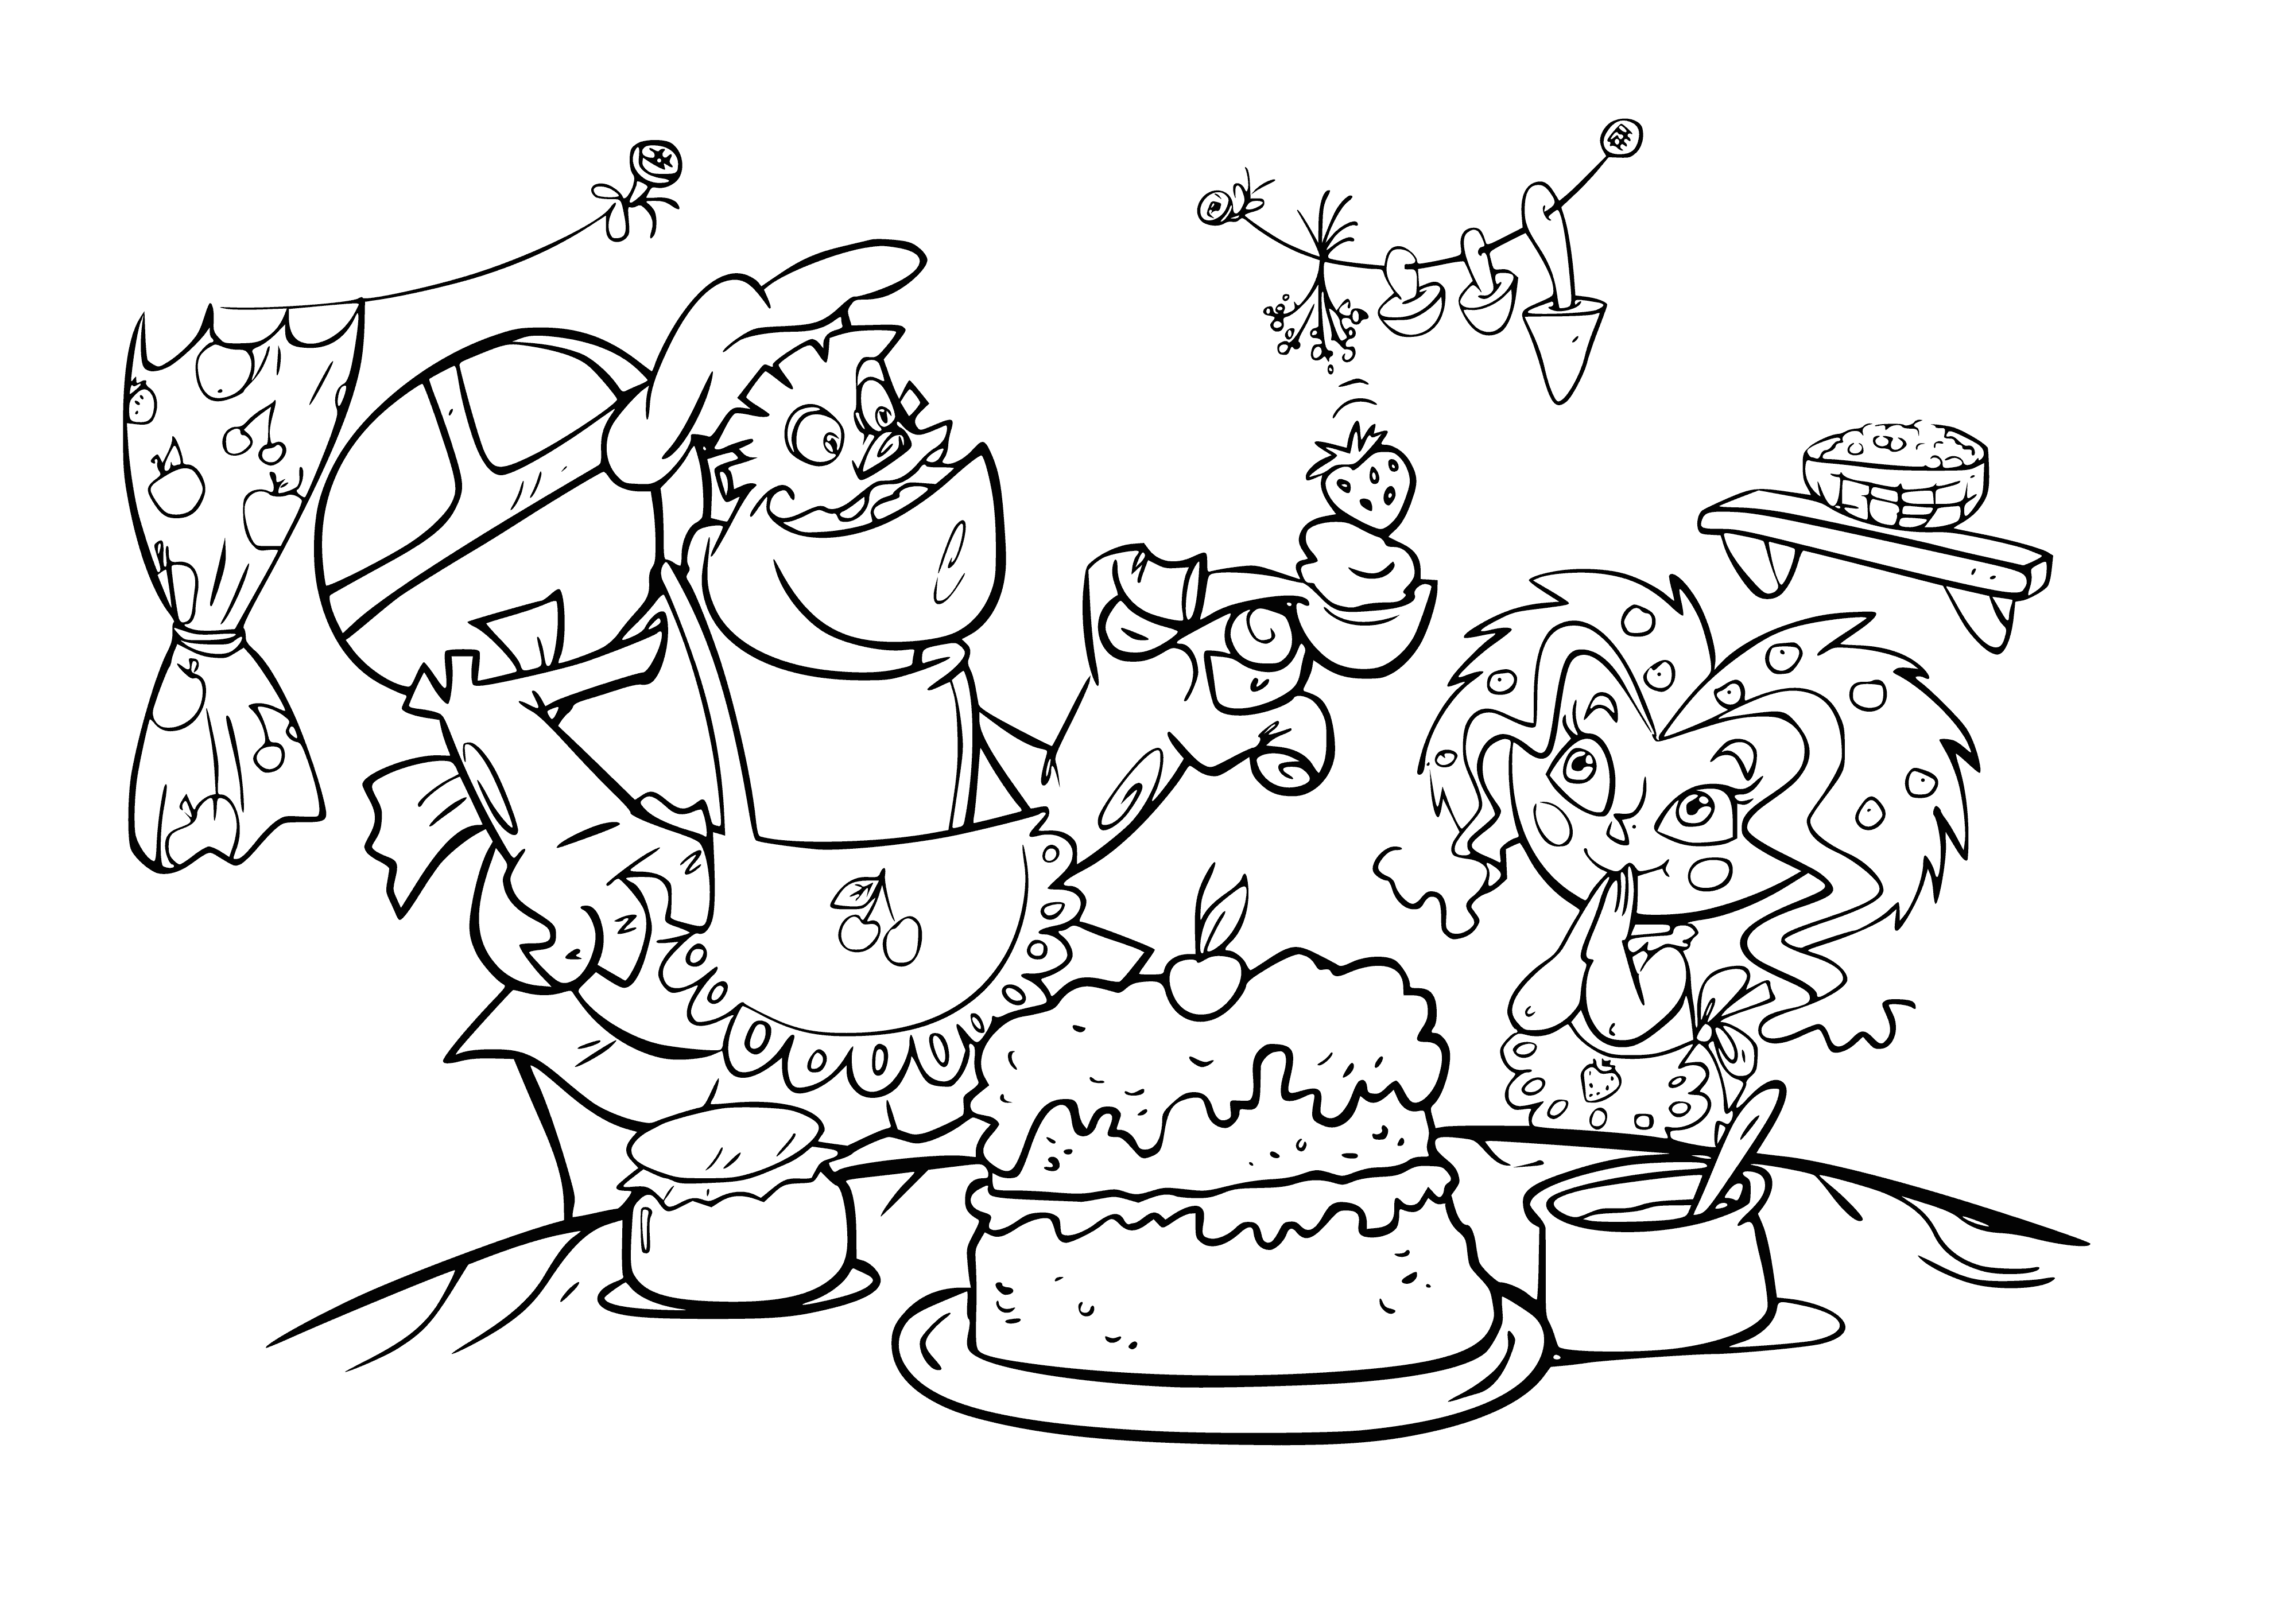 coloring page: Young Leshiki uses magic to stop evil Zelenka, who creates monsters with a black box to do his bidding.